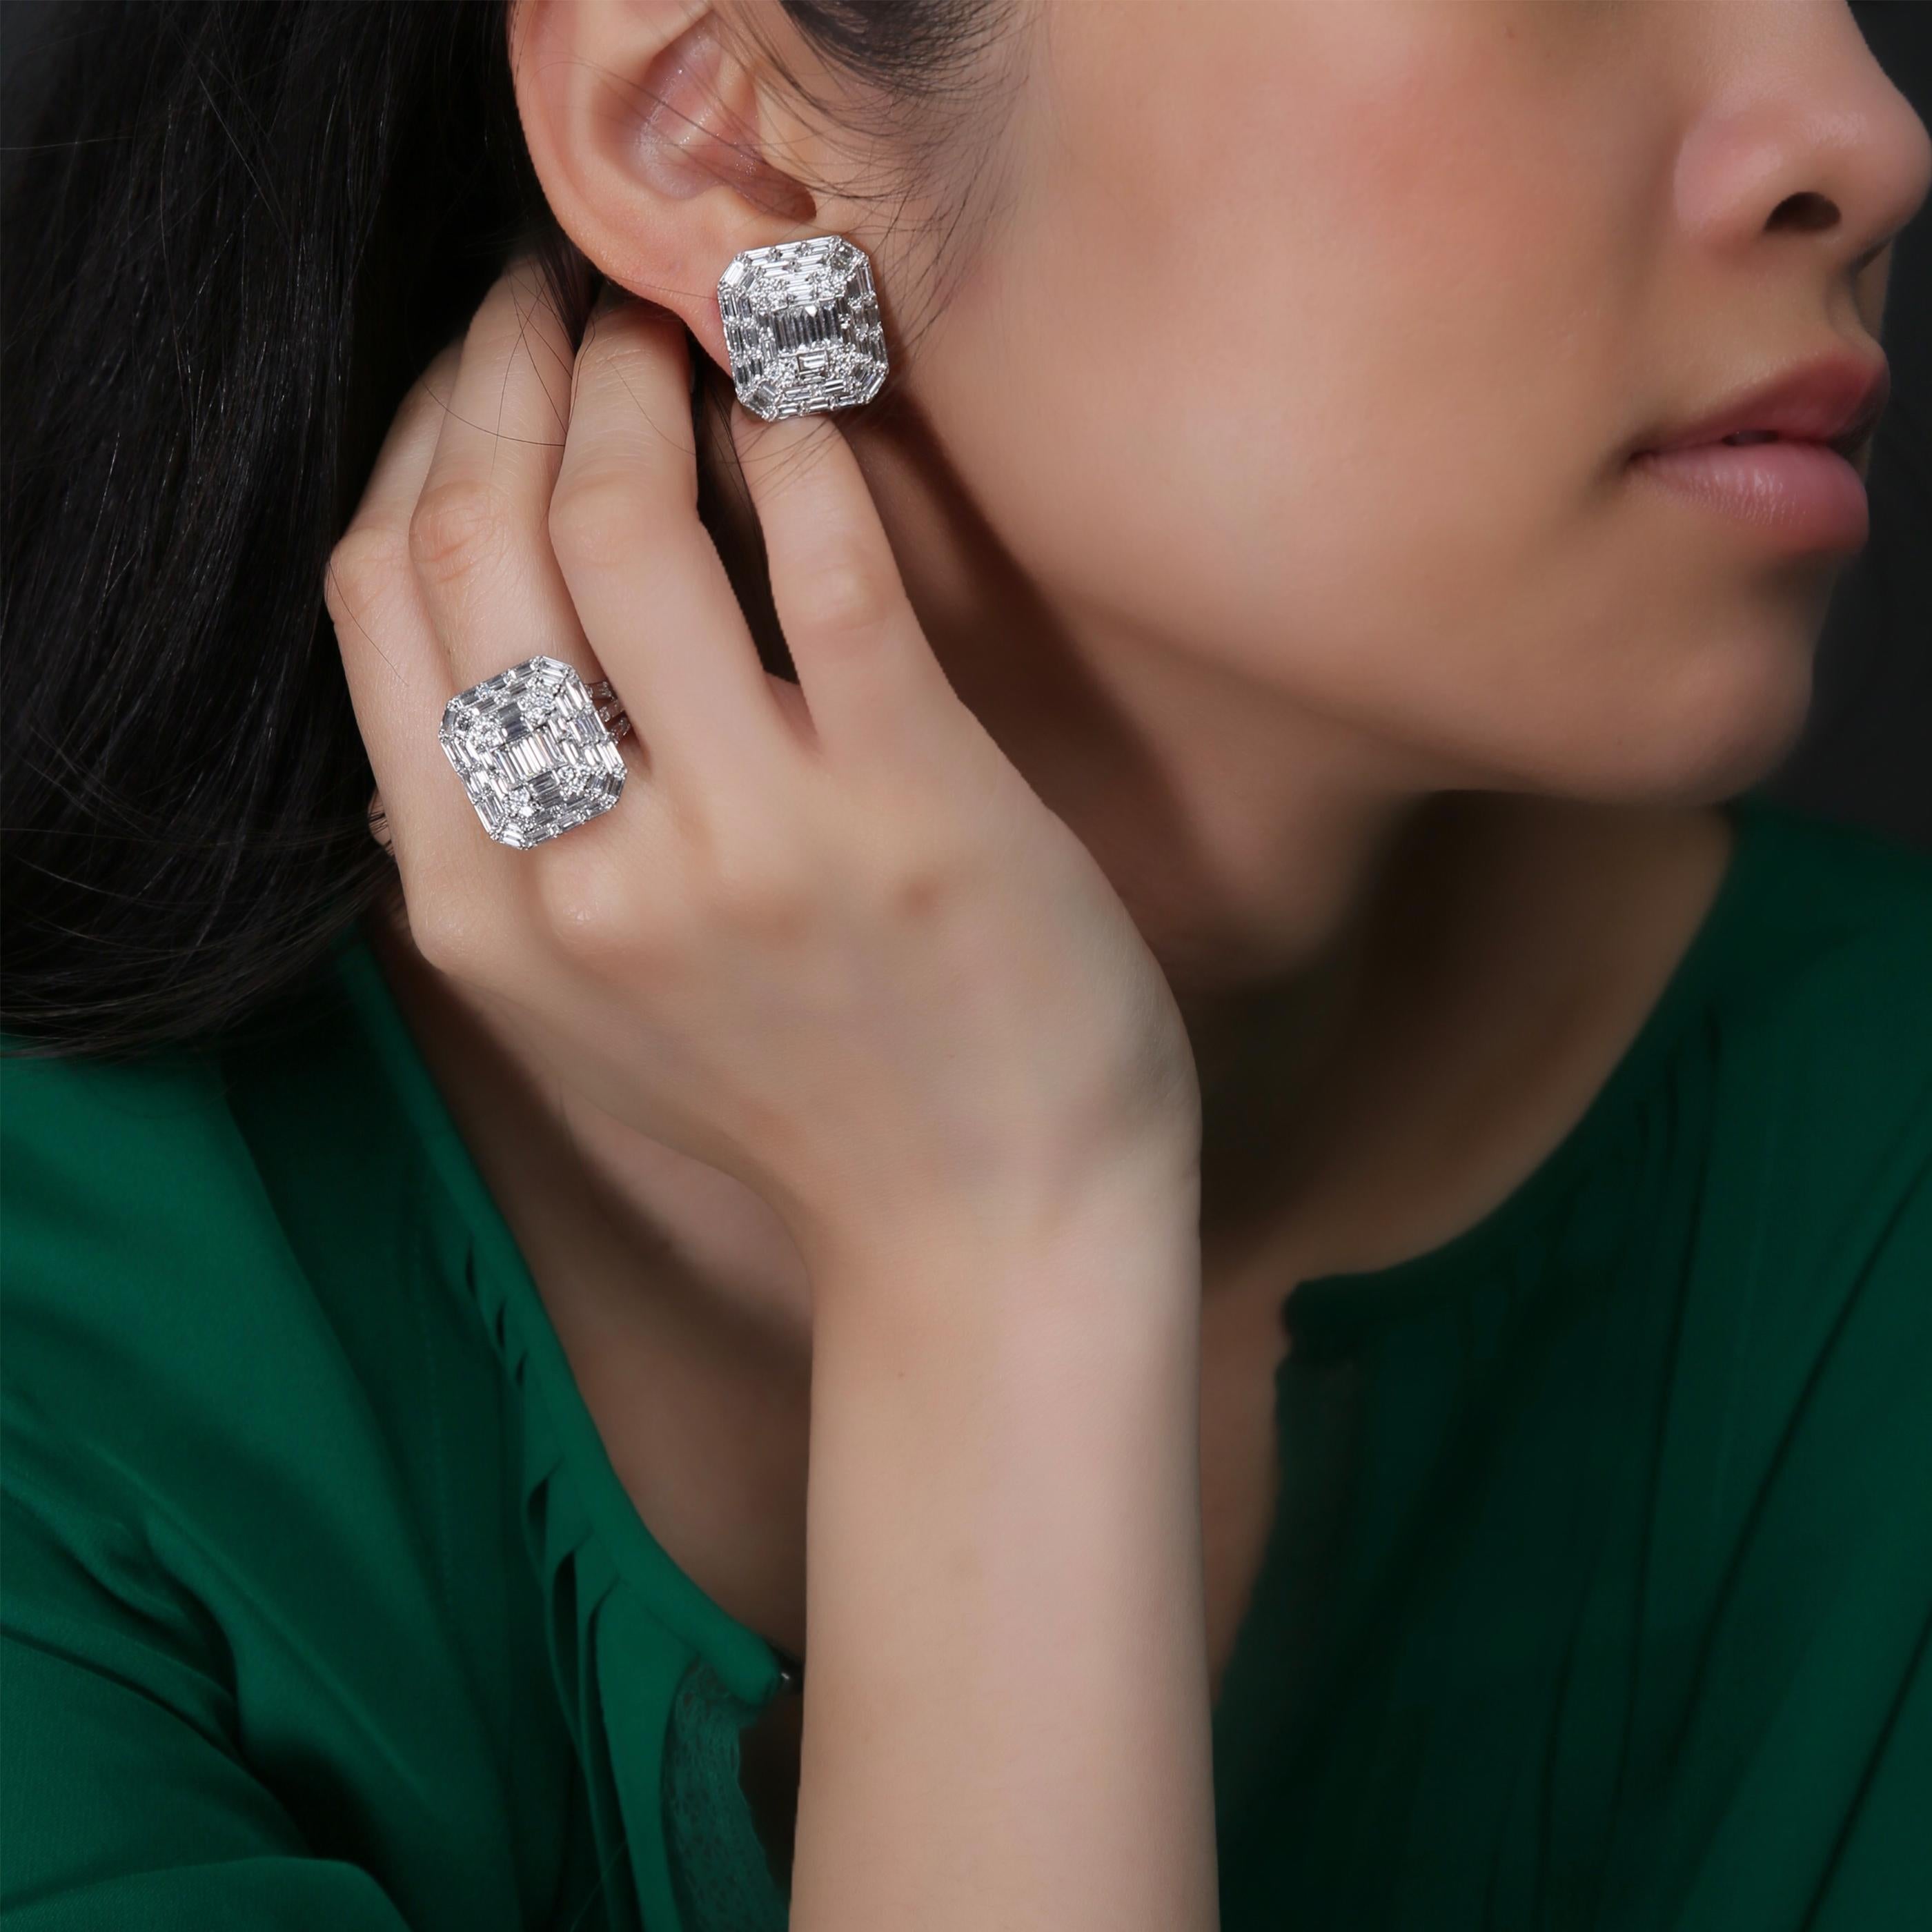 This medium diamond earring and ring set is crafted in 18-karat white gold, weighing approximately 6.12 total carats of SI-V Quality white diamonds. The ring is comfortable and can be sized 